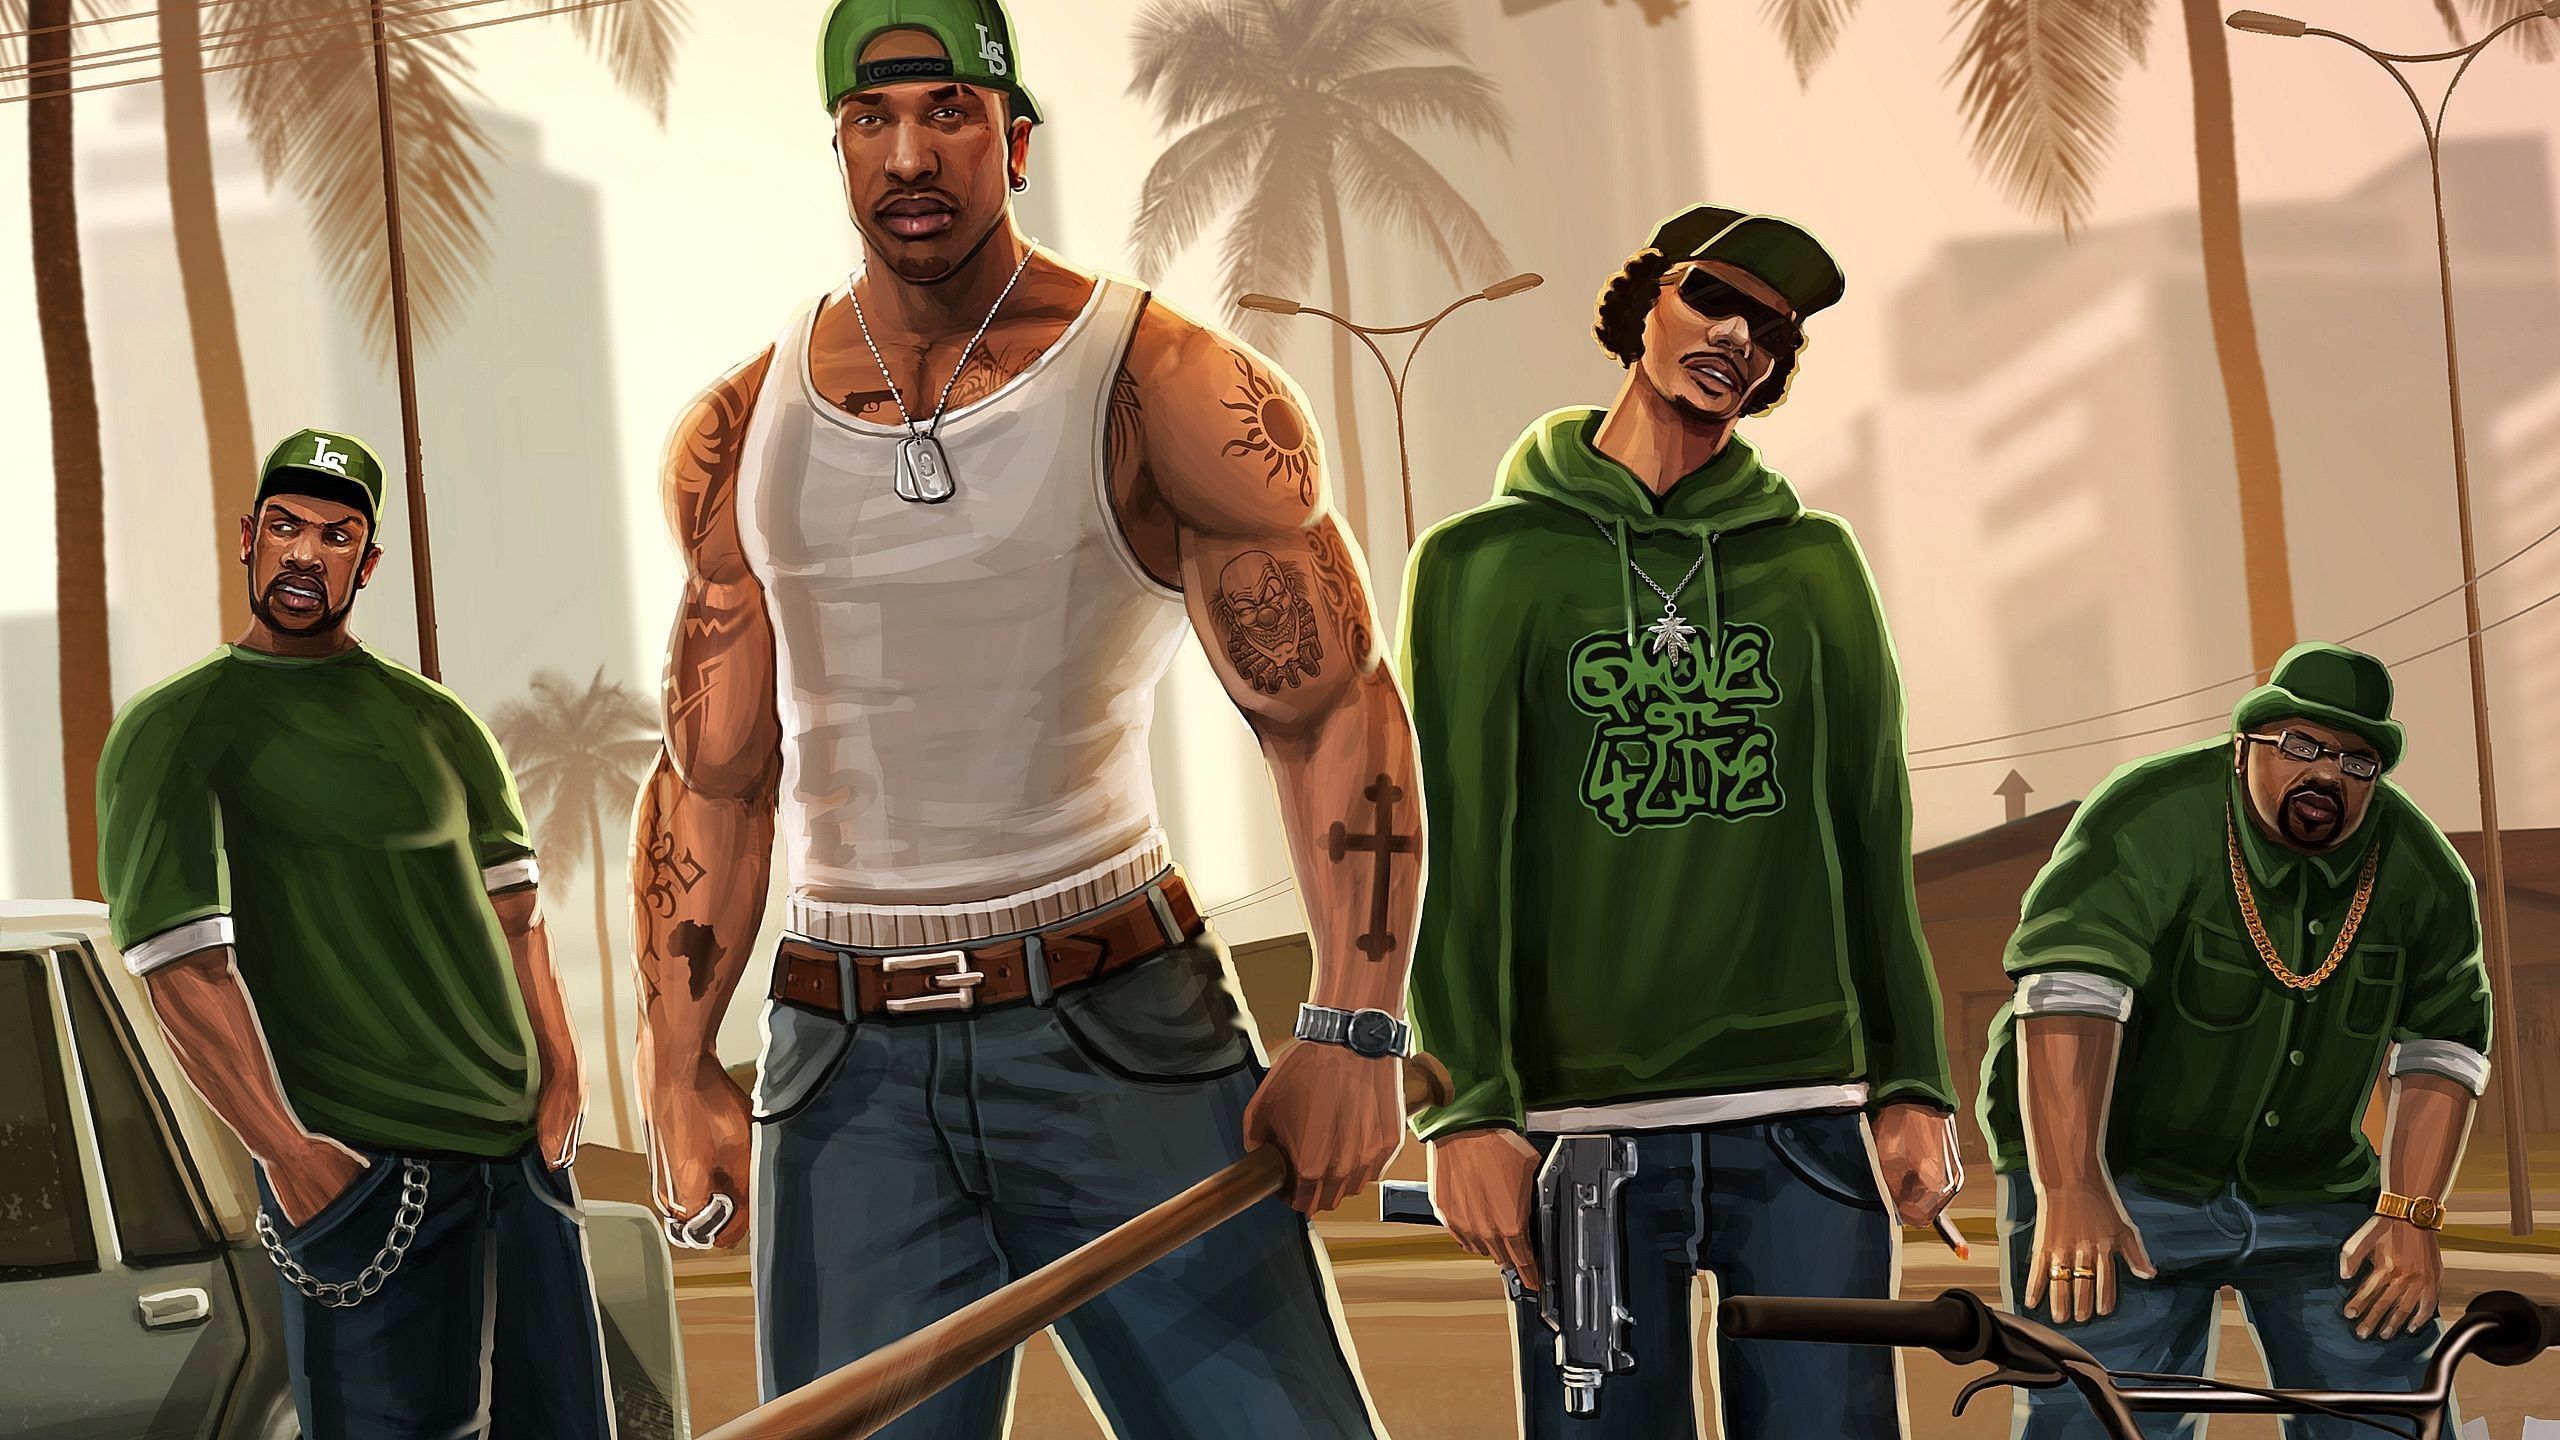 Grand Theft Auto: San Andreas HD Wallpaper and Background